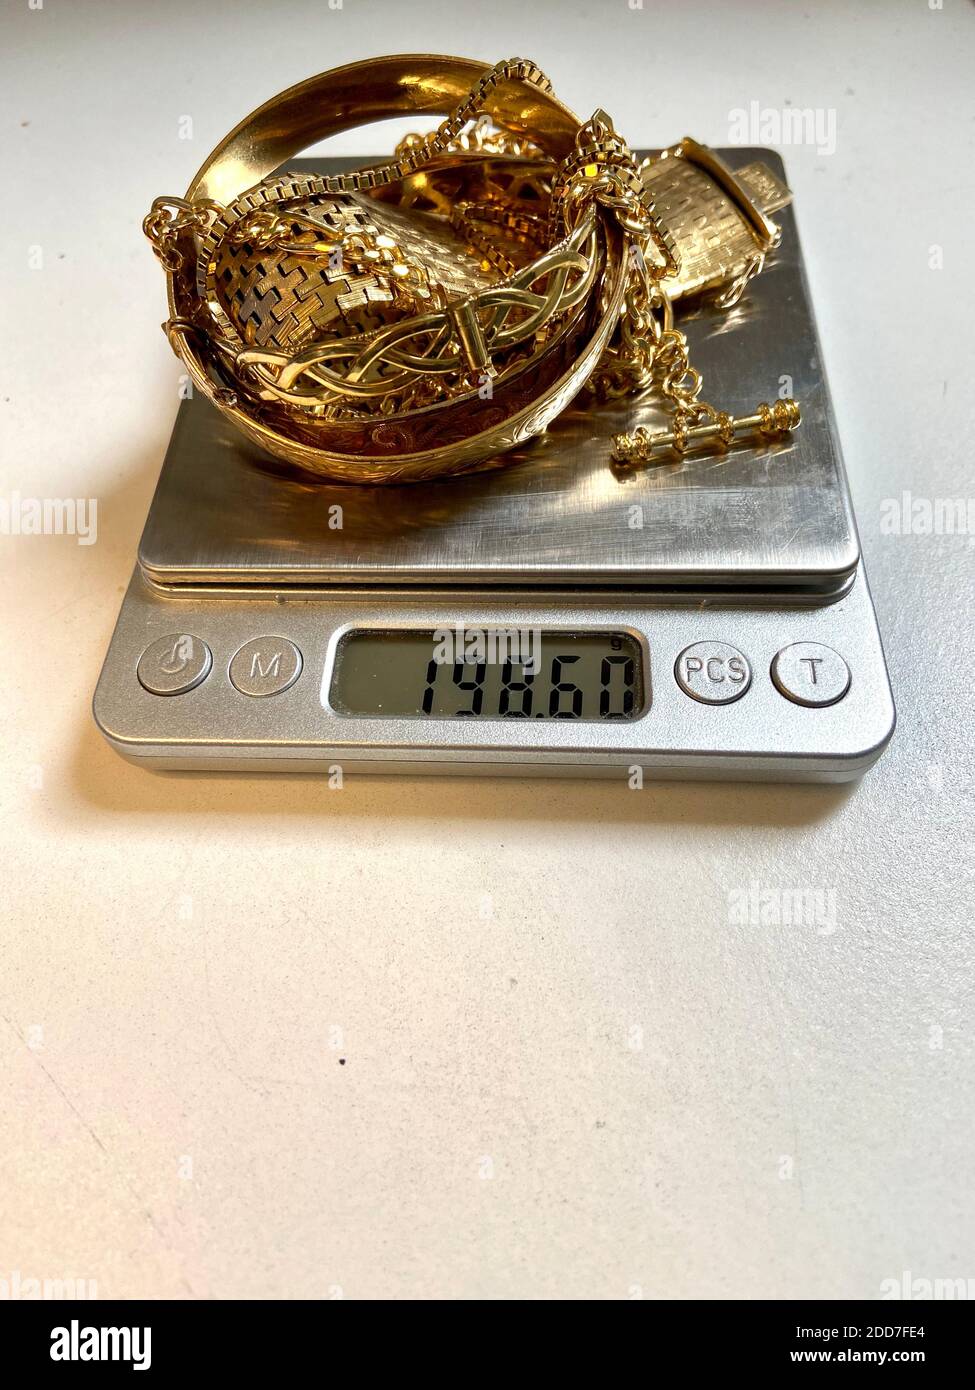 https://c8.alamy.com/comp/2DD7FE4/gold-scrap-pile-chains-and-bangle-jewelry-on-scale-being-weighed-at-pawn-shop-2DD7FE4.jpg